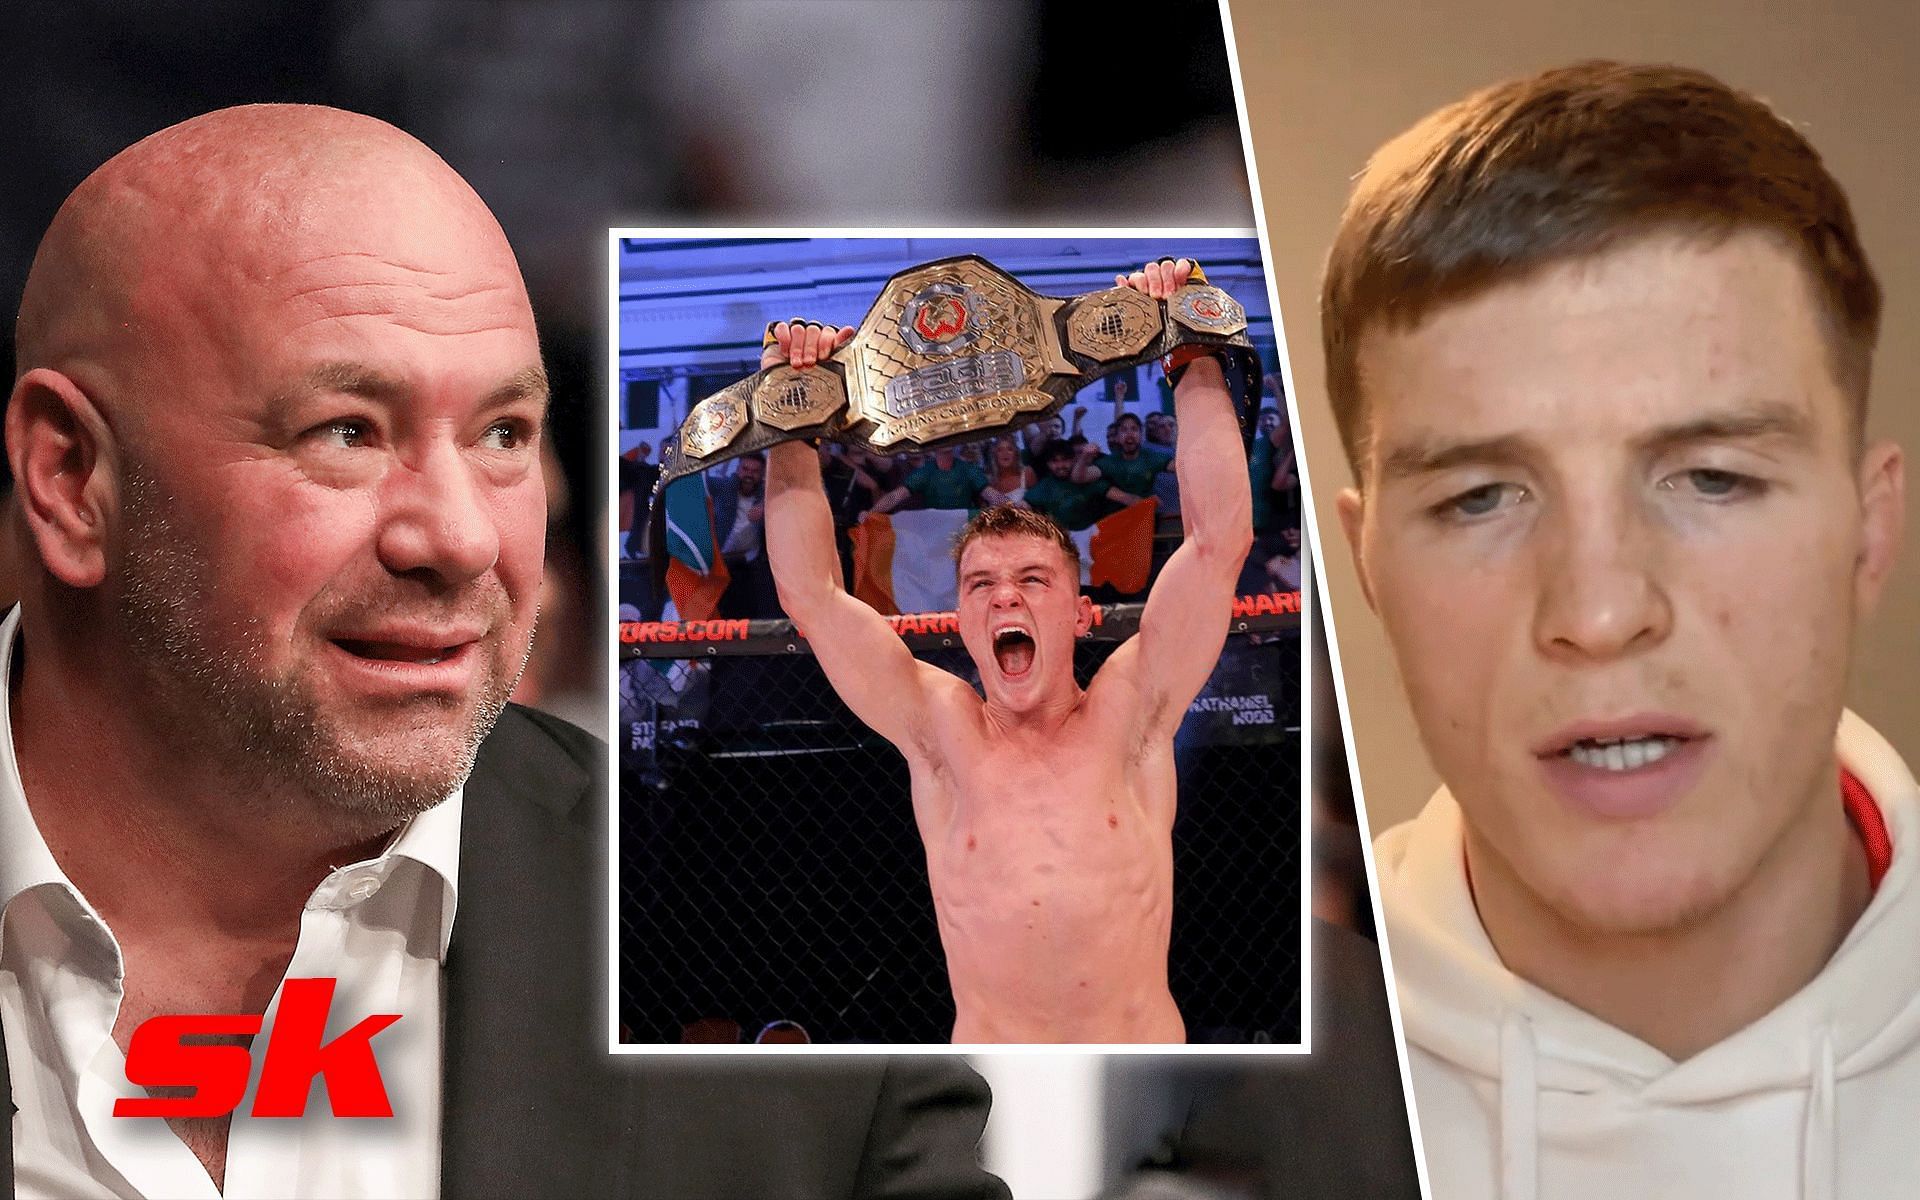 Dana White (left) and Paul Hughes (center and right). [Images courtesy: left image from Getty Images, rest from Instagram @paulhughesmma]